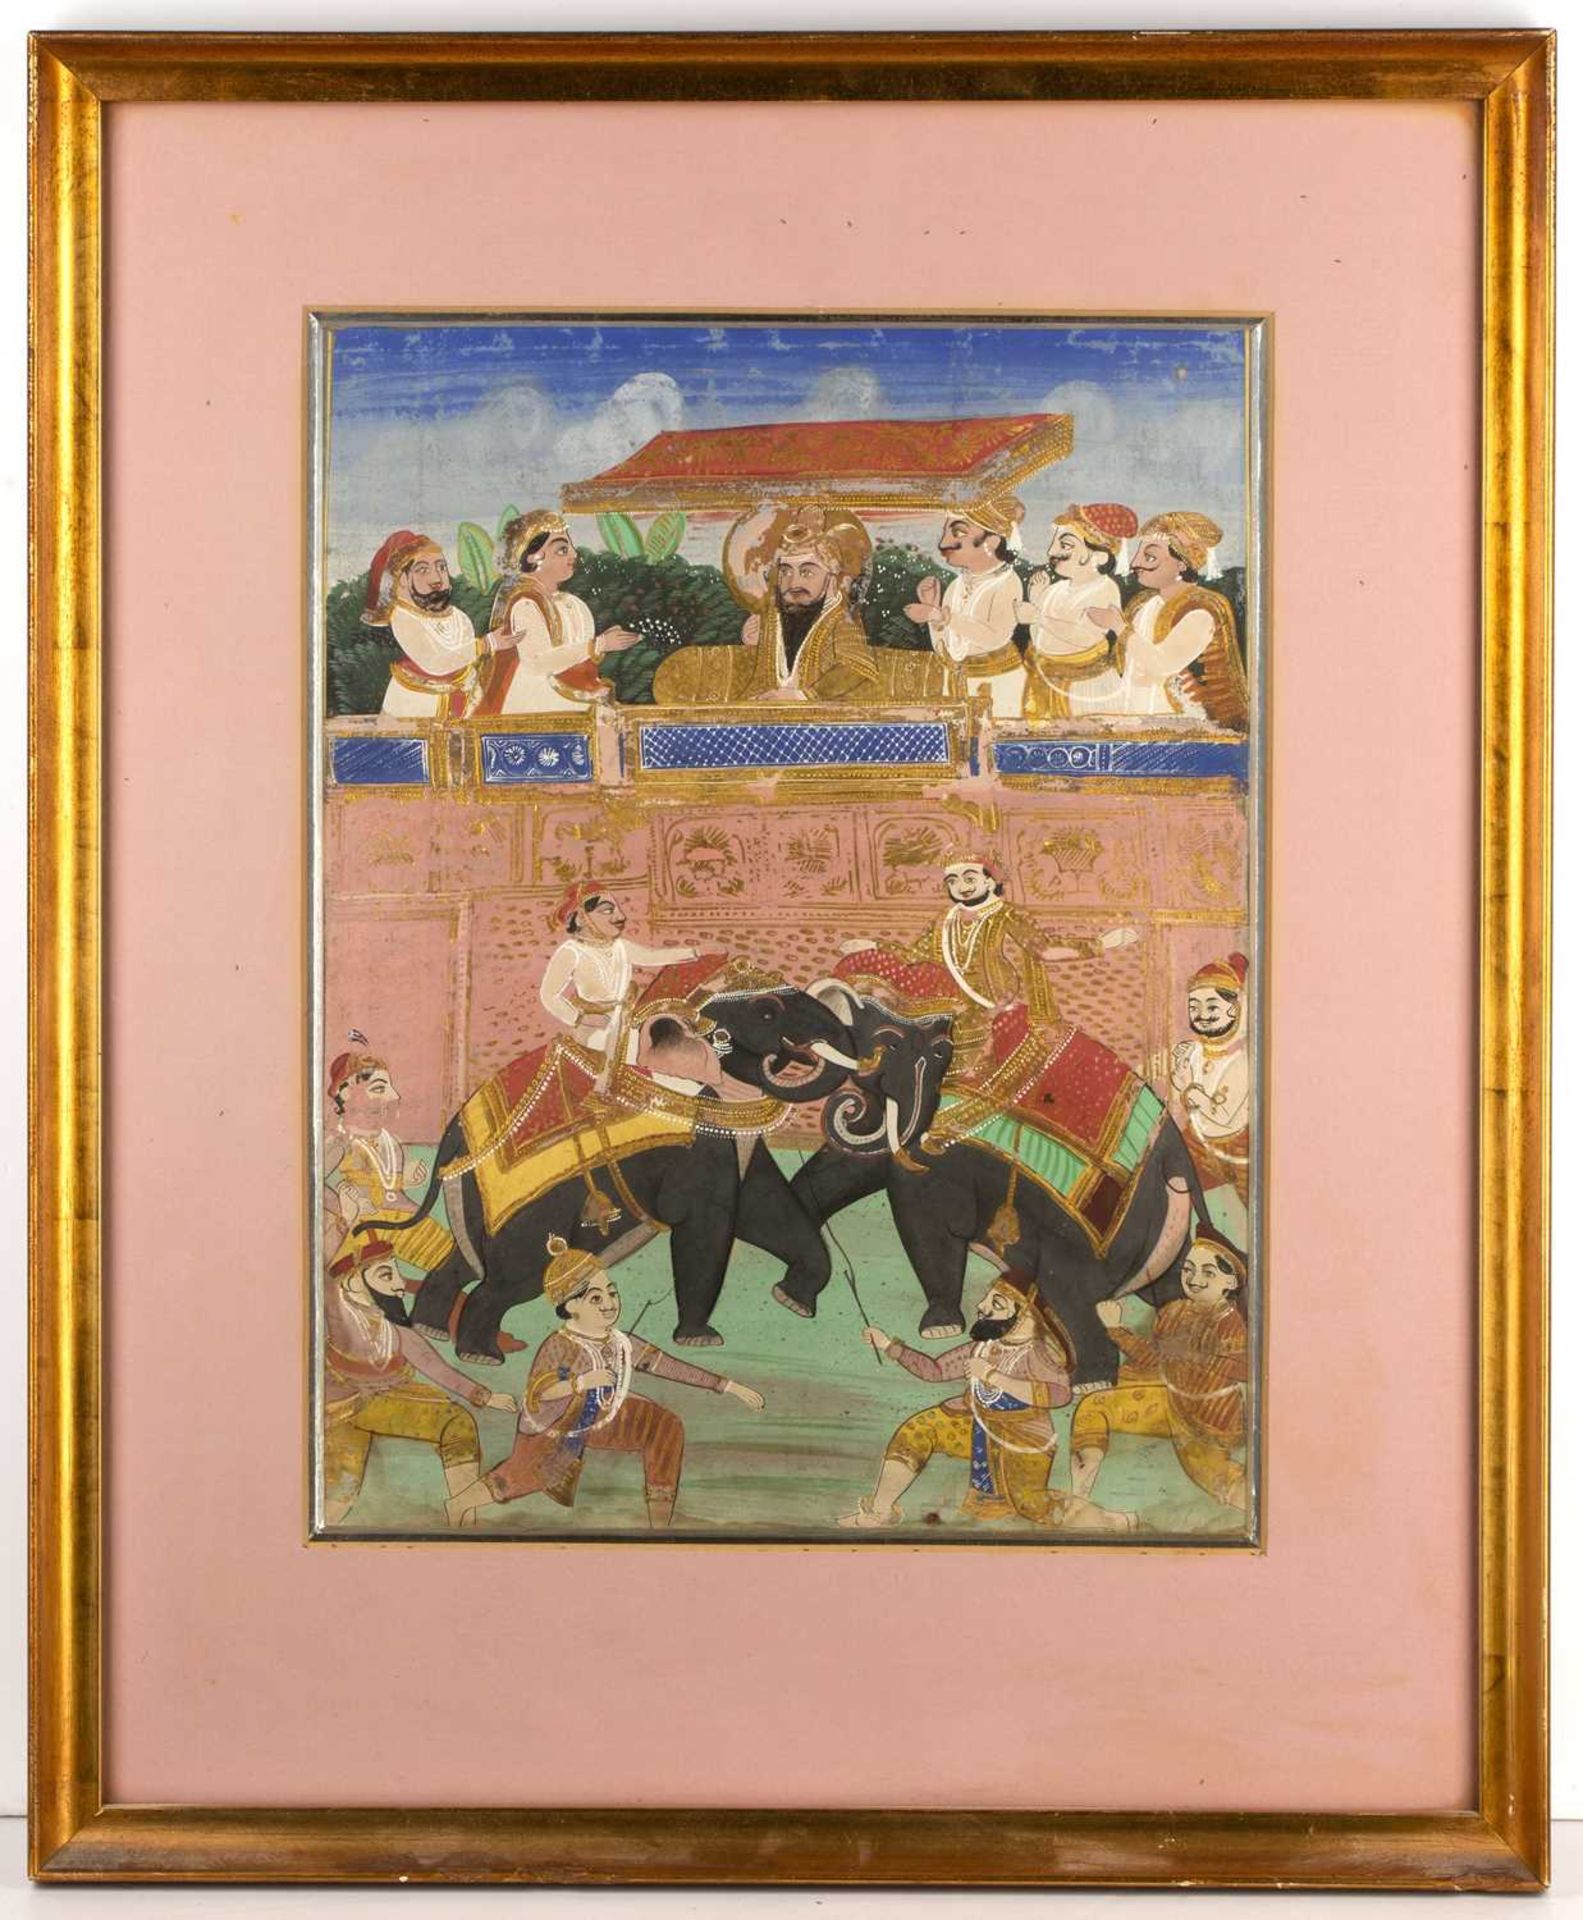 Elephant related pictures Indian, the first depicting Mohammed Adil Shah, Sultan of Bijapur and - Image 3 of 6